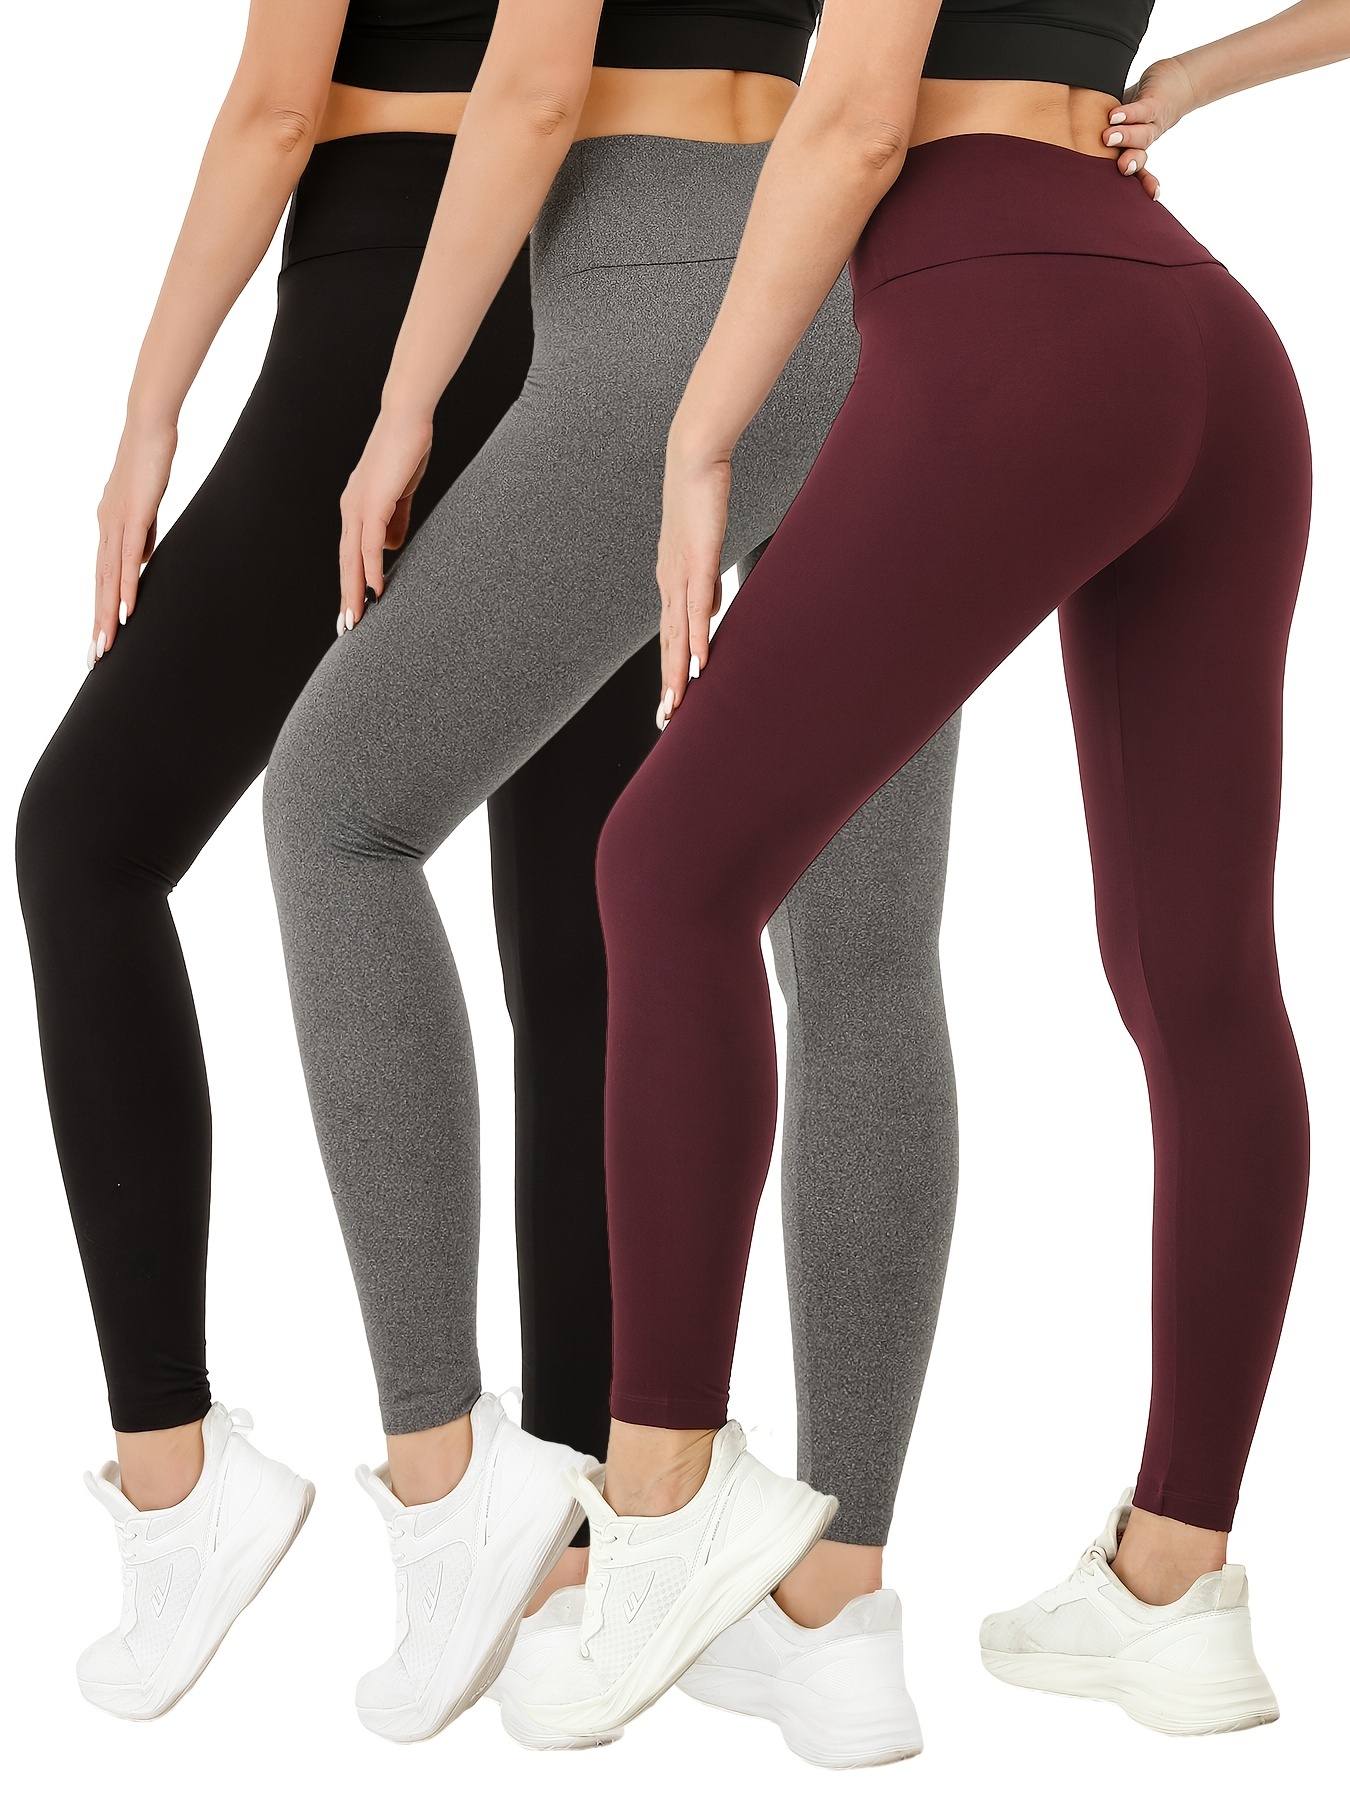 High Waist Candy Color Seamless Yoga Leggings With Pockets With Pockets For  Women Perfect For Fitness, Running, And Sports H1221 From Mengyang10,  $18.94